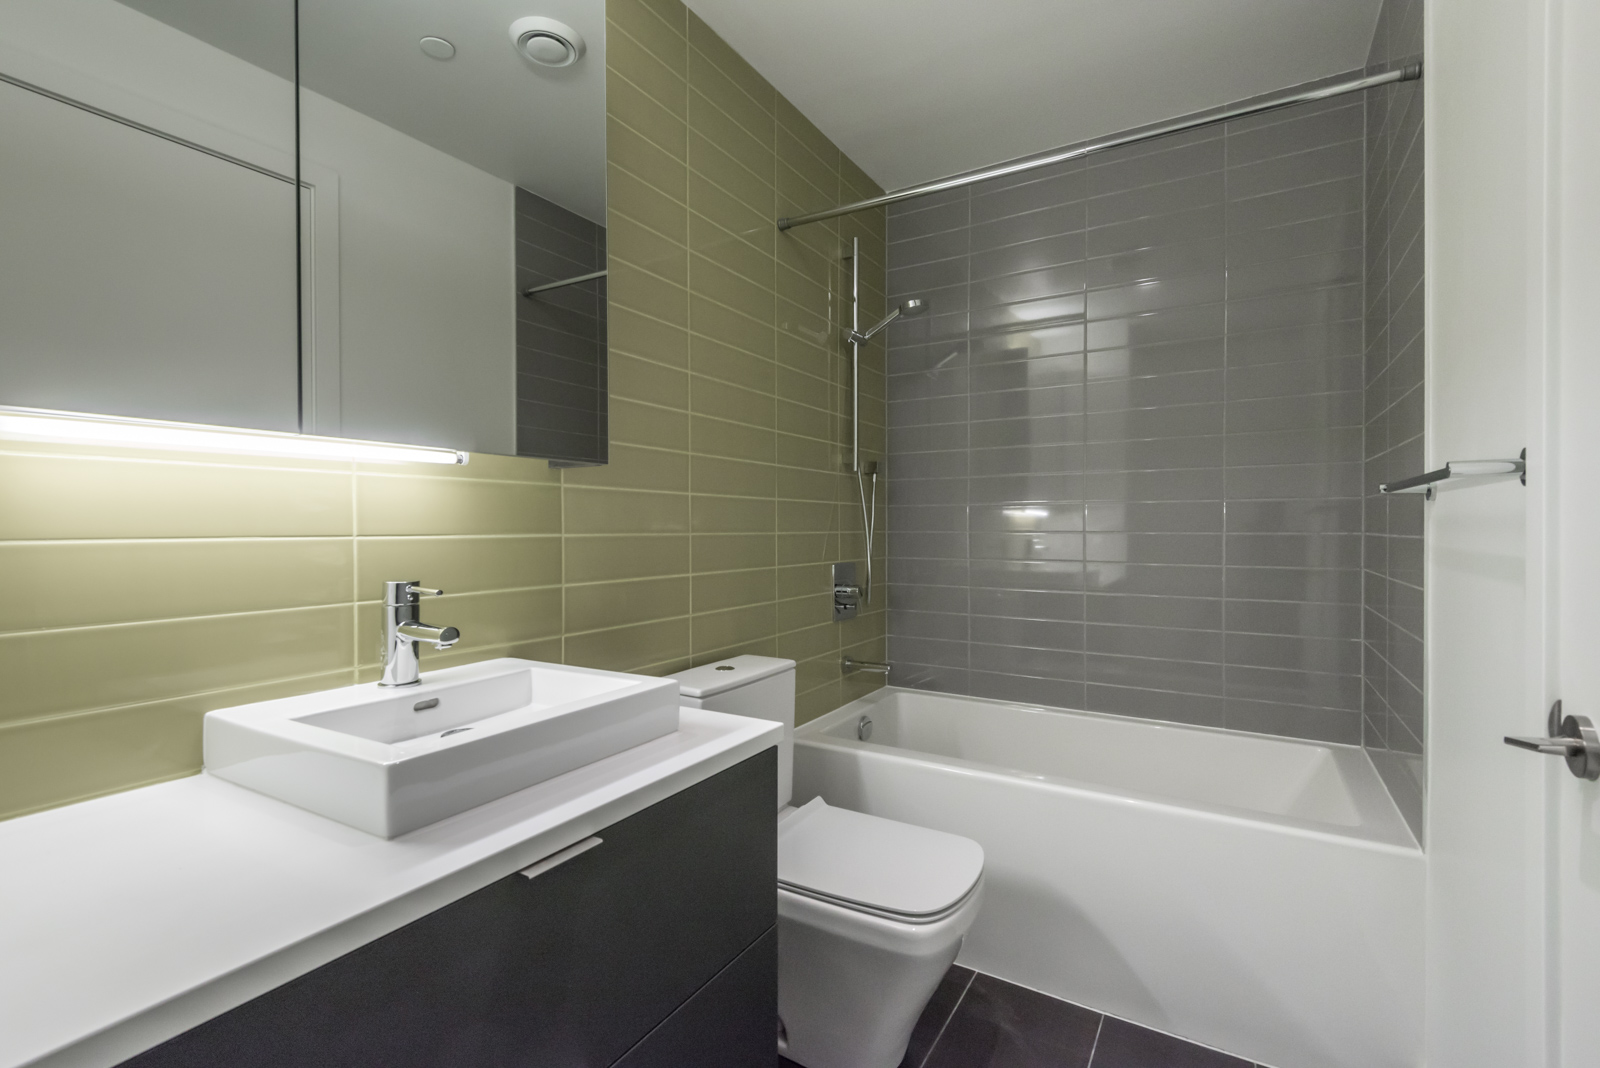 Image showing bathroom and tub. Also shows green and gray tiles, sink, and toilet.